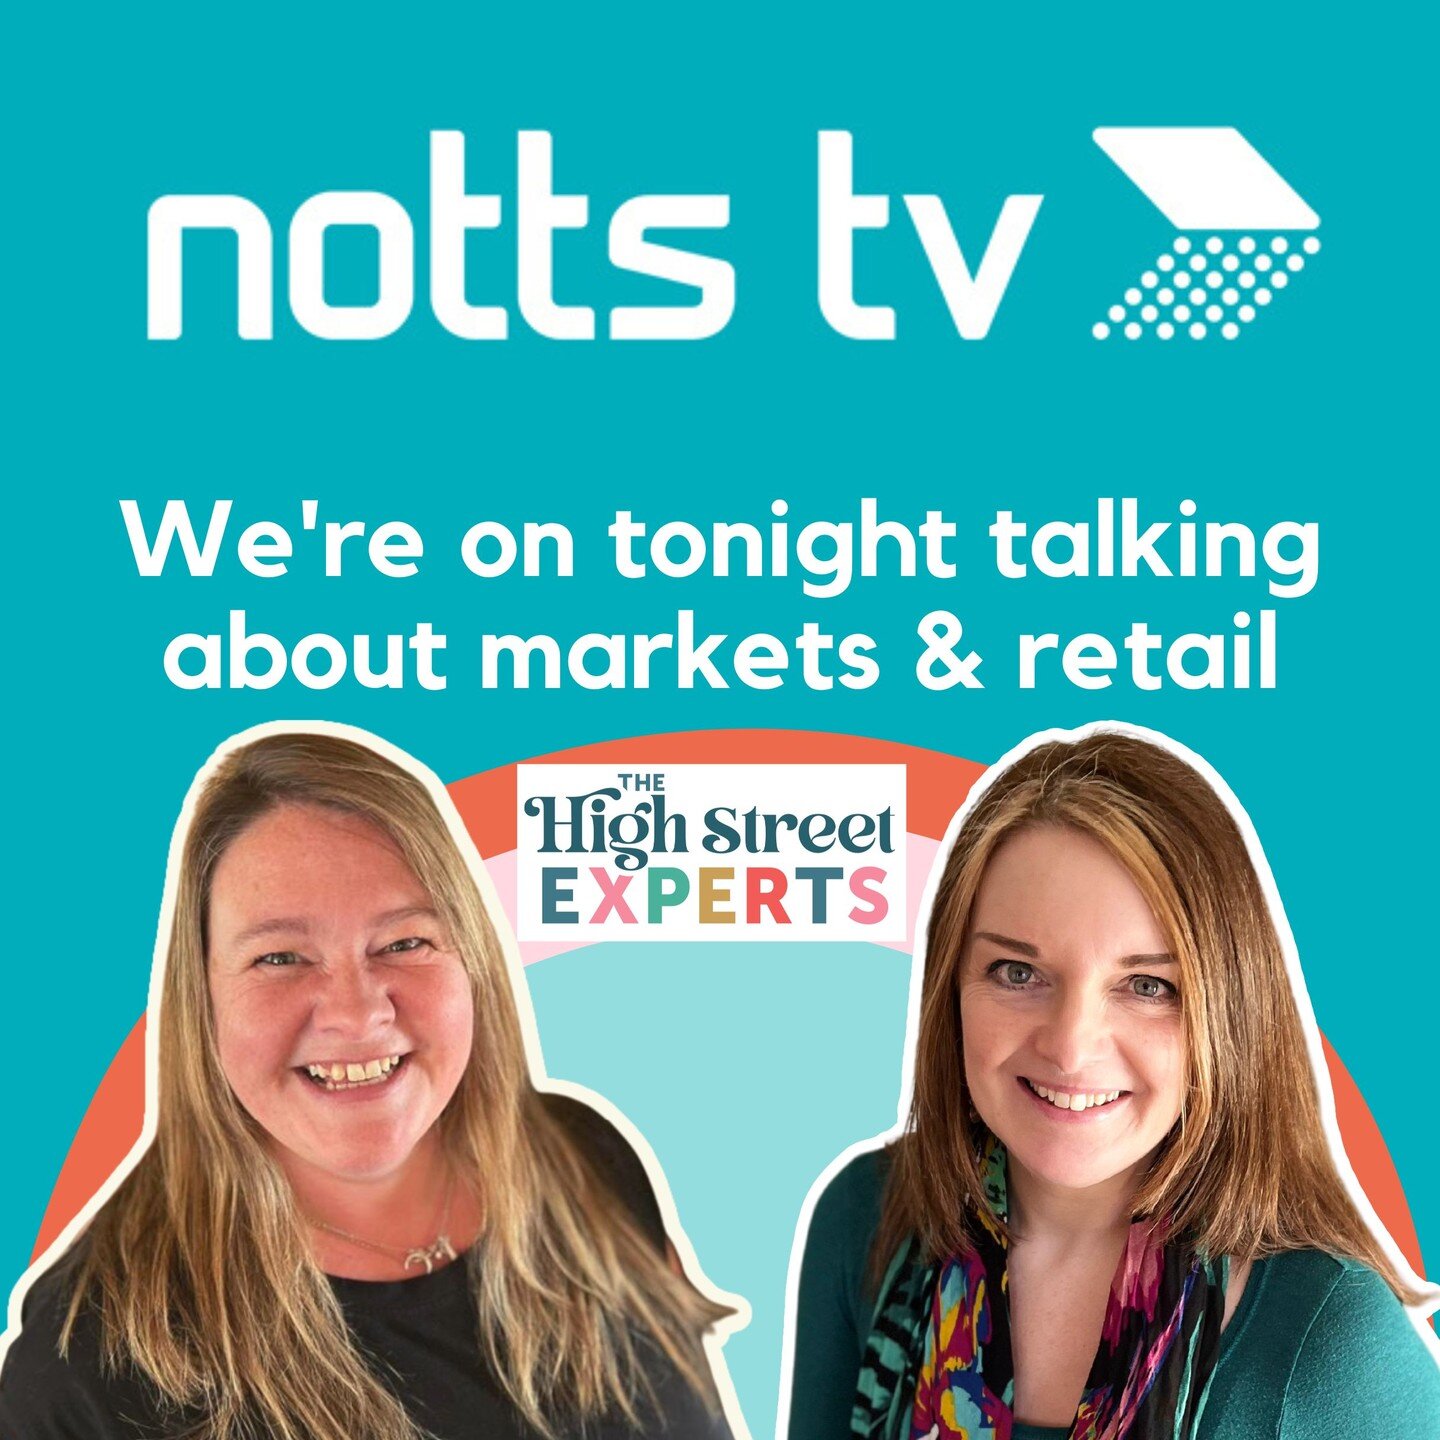 We're on @notts_tv tonight so watch between 5.30-630 to hear us talking about markets and retail in Nottingham and beyond. #retailsupport #highstreet #retailadvice #savethehighstreet #nottinghammaker #binghammarket #makersmarket 
See you soon, Opheli